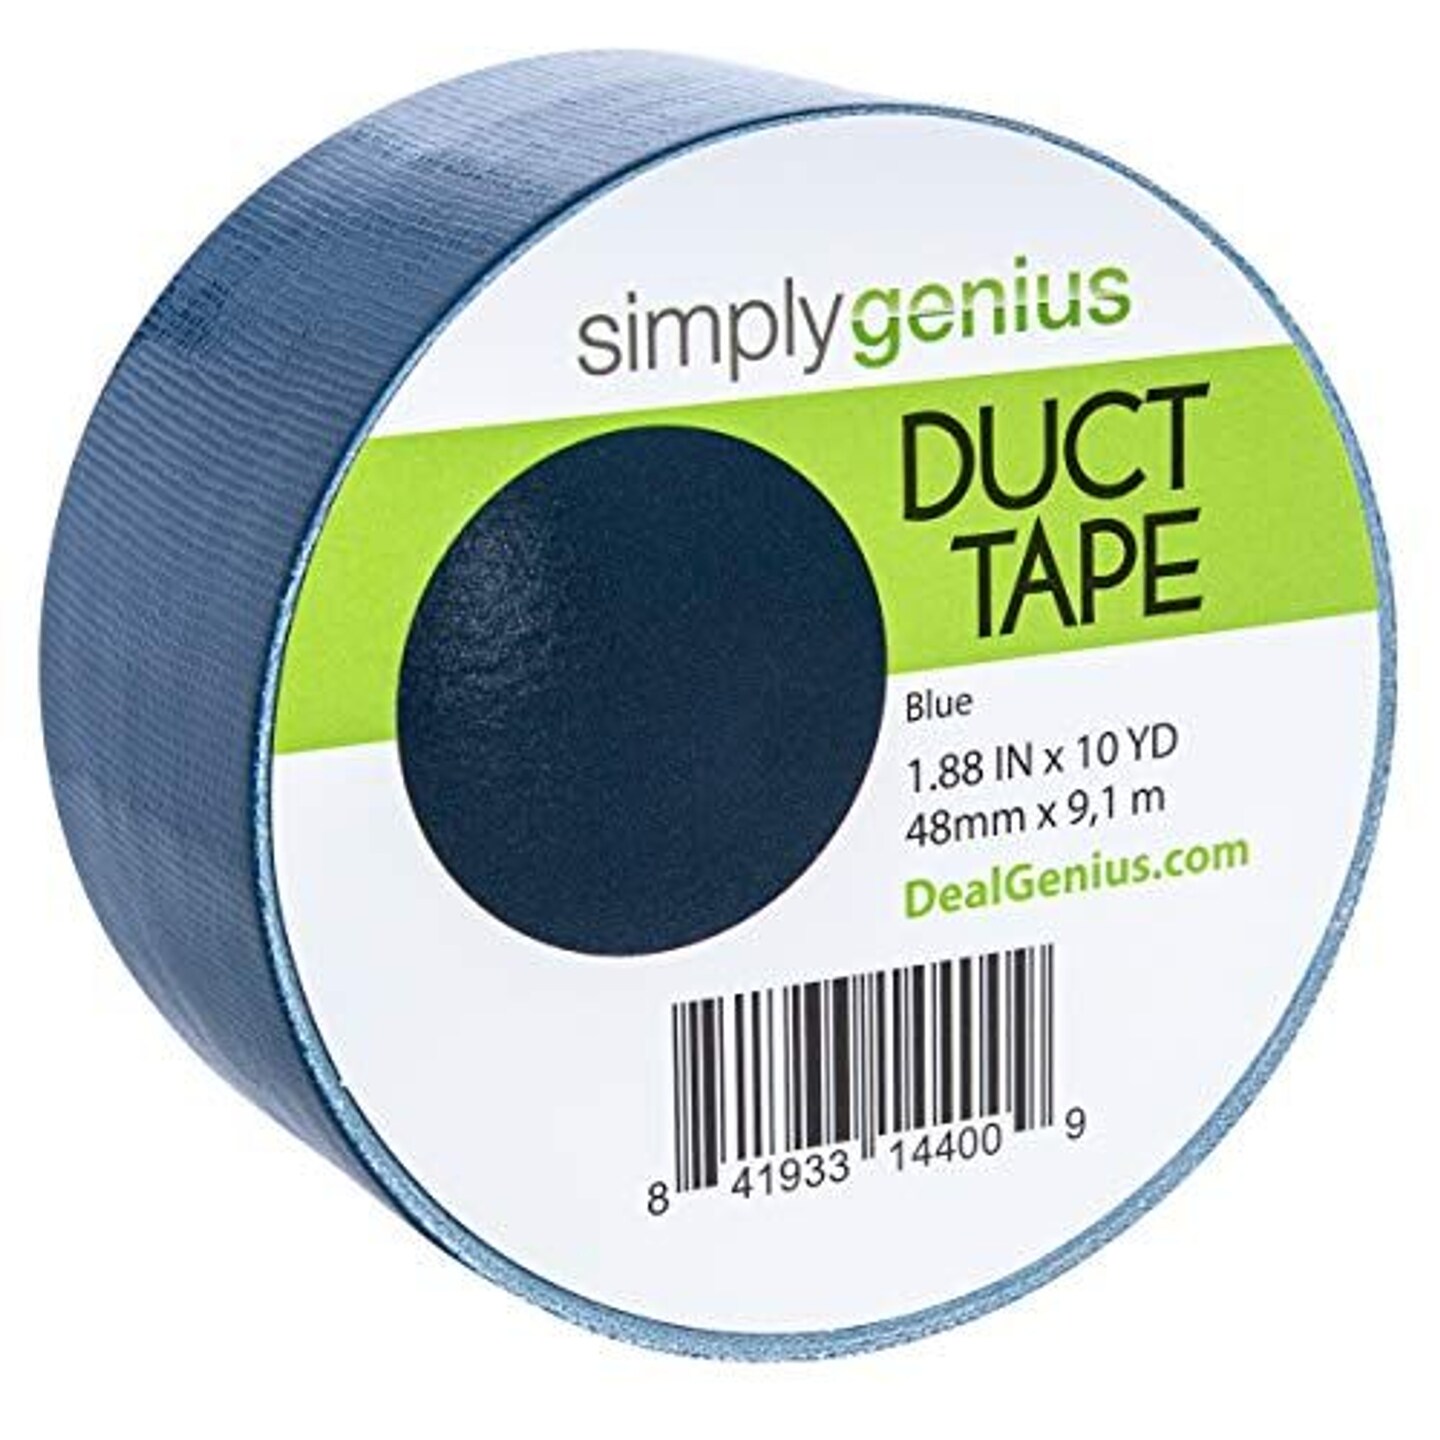 Simply Genius Art &#x26; Craft Duct Tape Heavy Duty - Craft Supplies for Kids &#x26; Adults - Colored Duct Tape - 1.8 in x 10 yards - Colorful Tape for DIY, Craft &#x26; Home Improvement (Blue, Single roll)